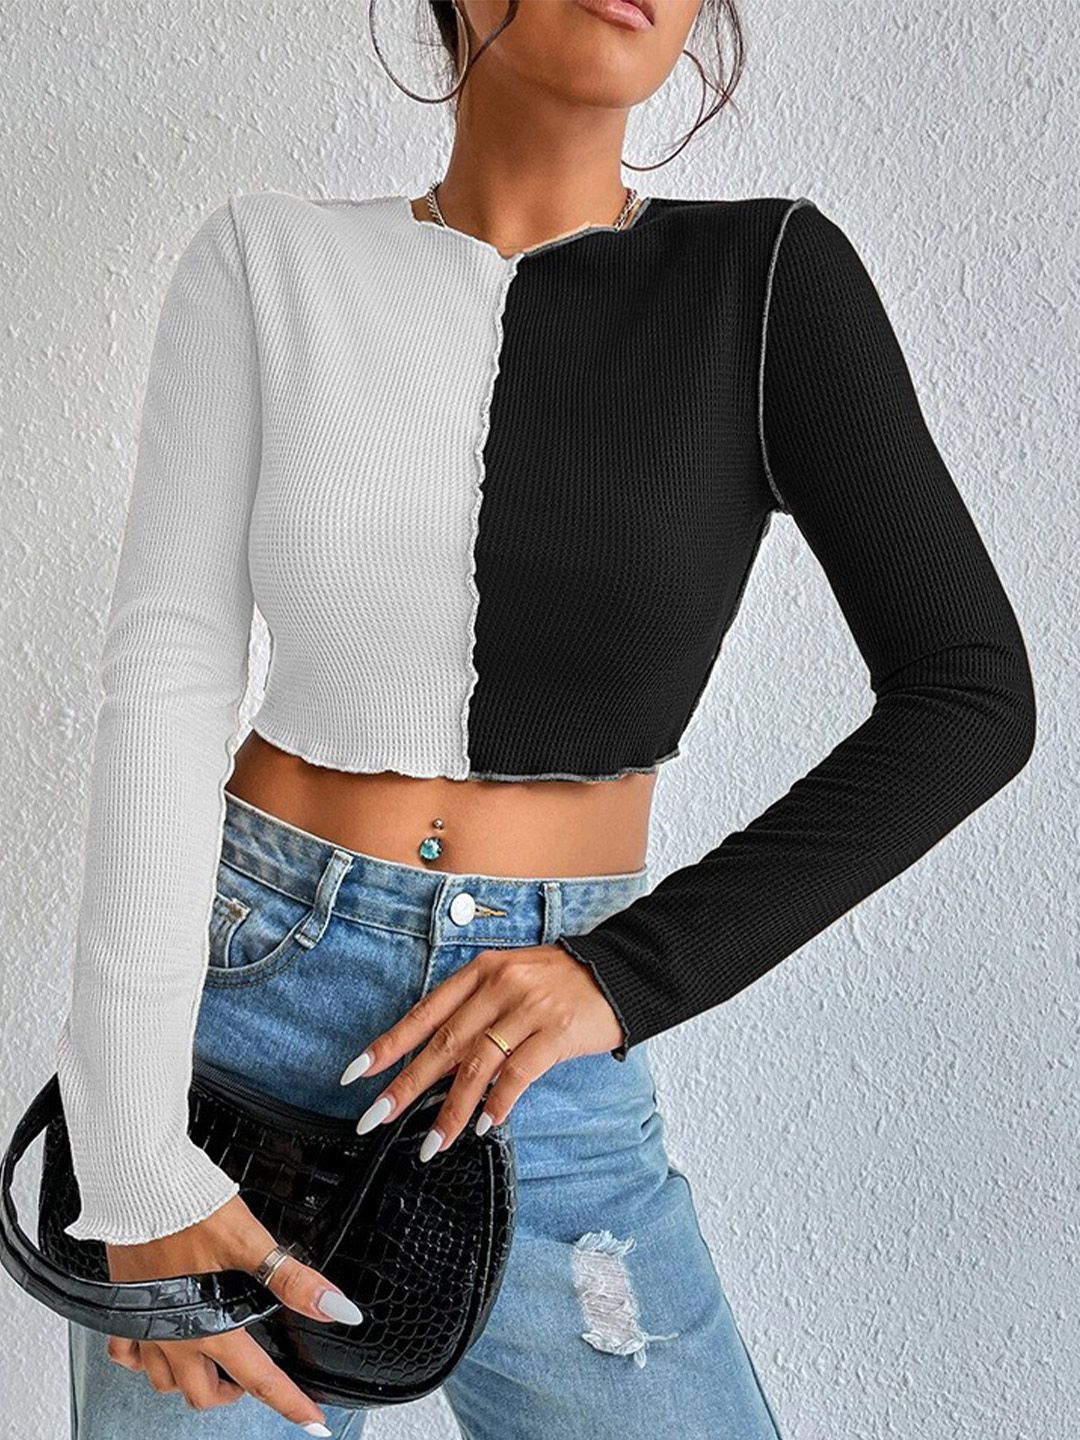 StyleCast Women Black and White Colourblocked Crop Top Price in India